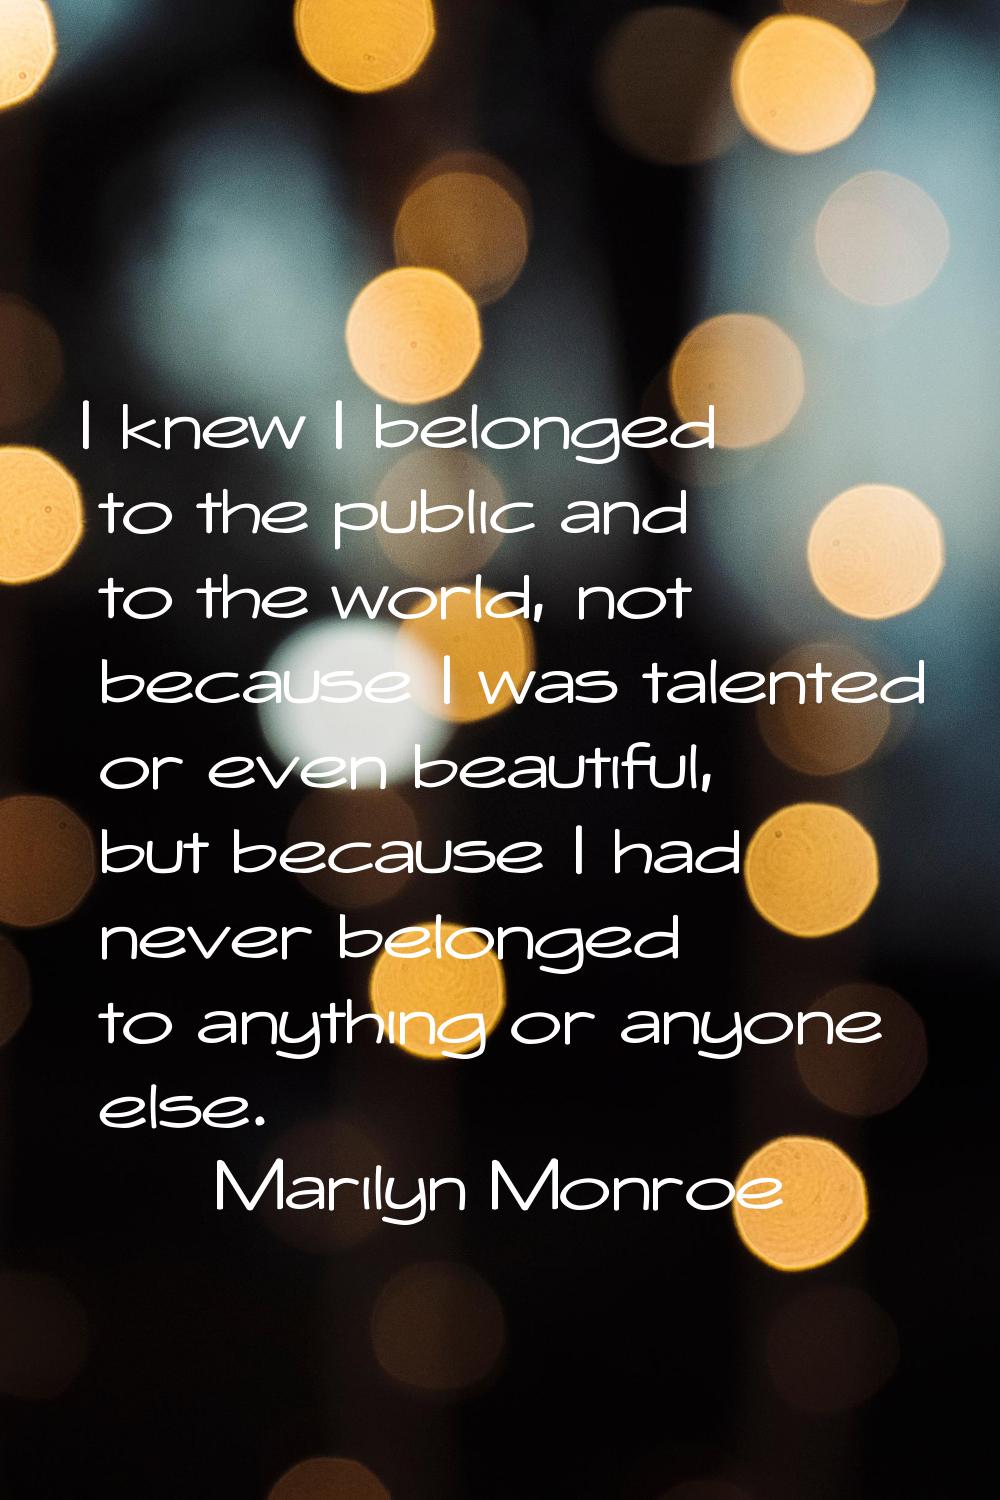 I knew I belonged to the public and to the world, not because I was talented or even beautiful, but